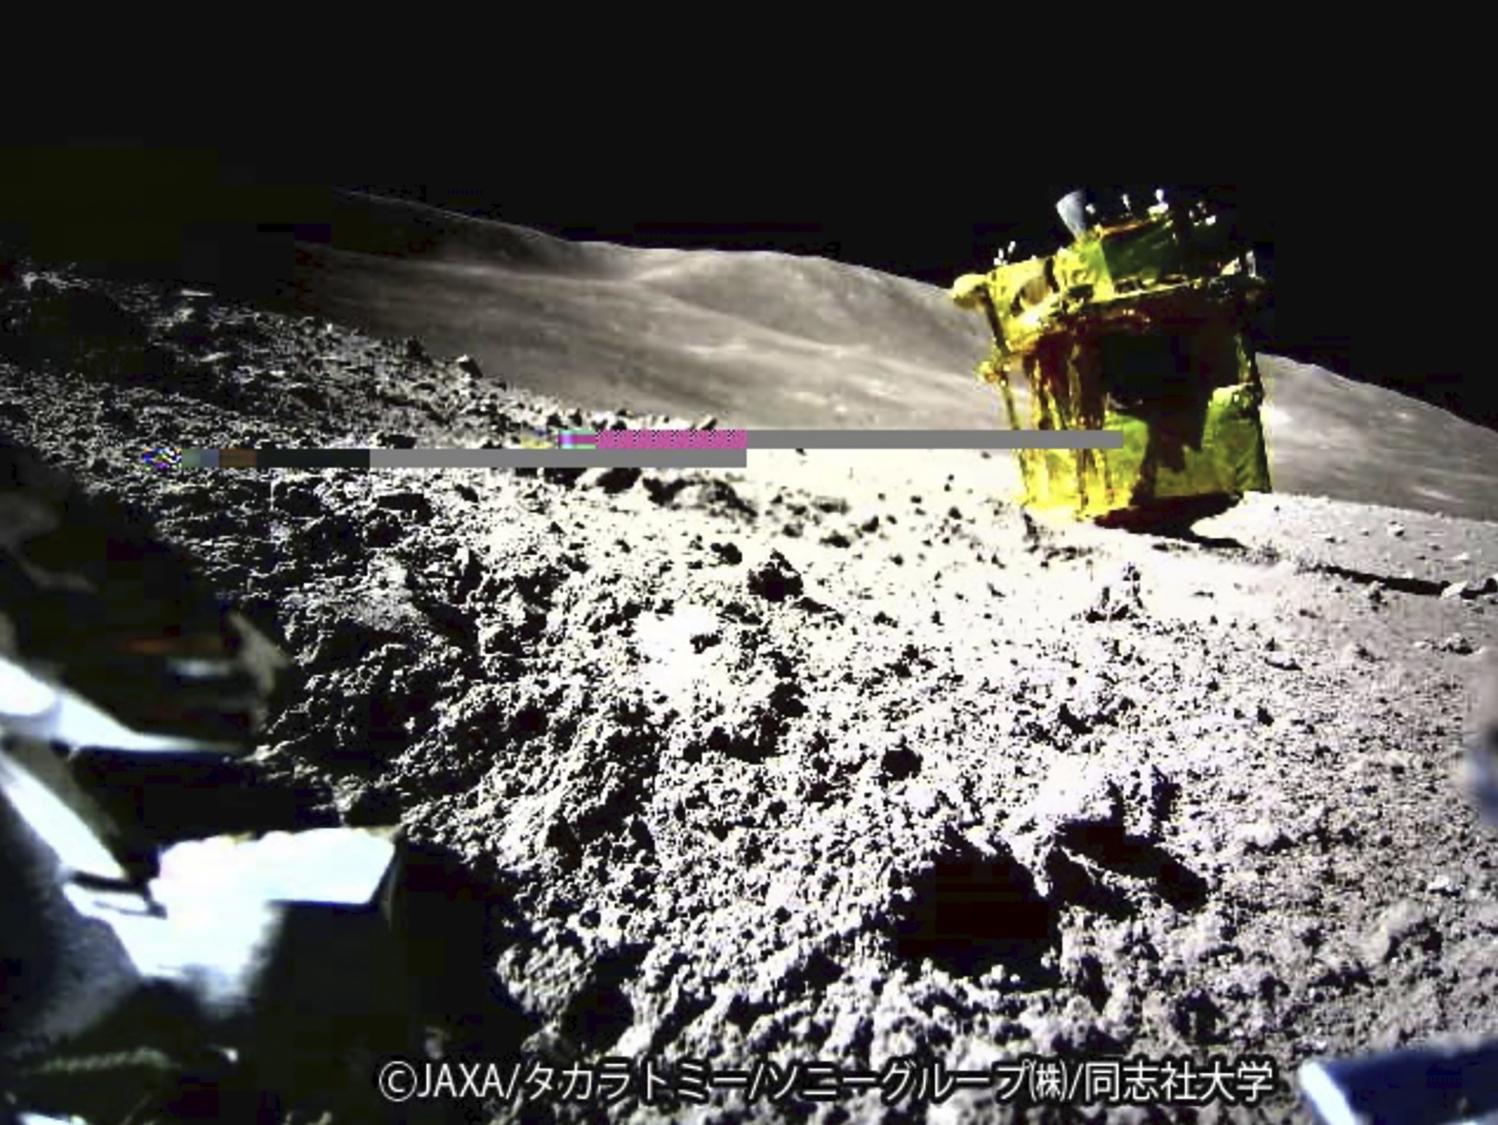 The moon lander from Japan successfully endured its second lunar night, defying expectations.